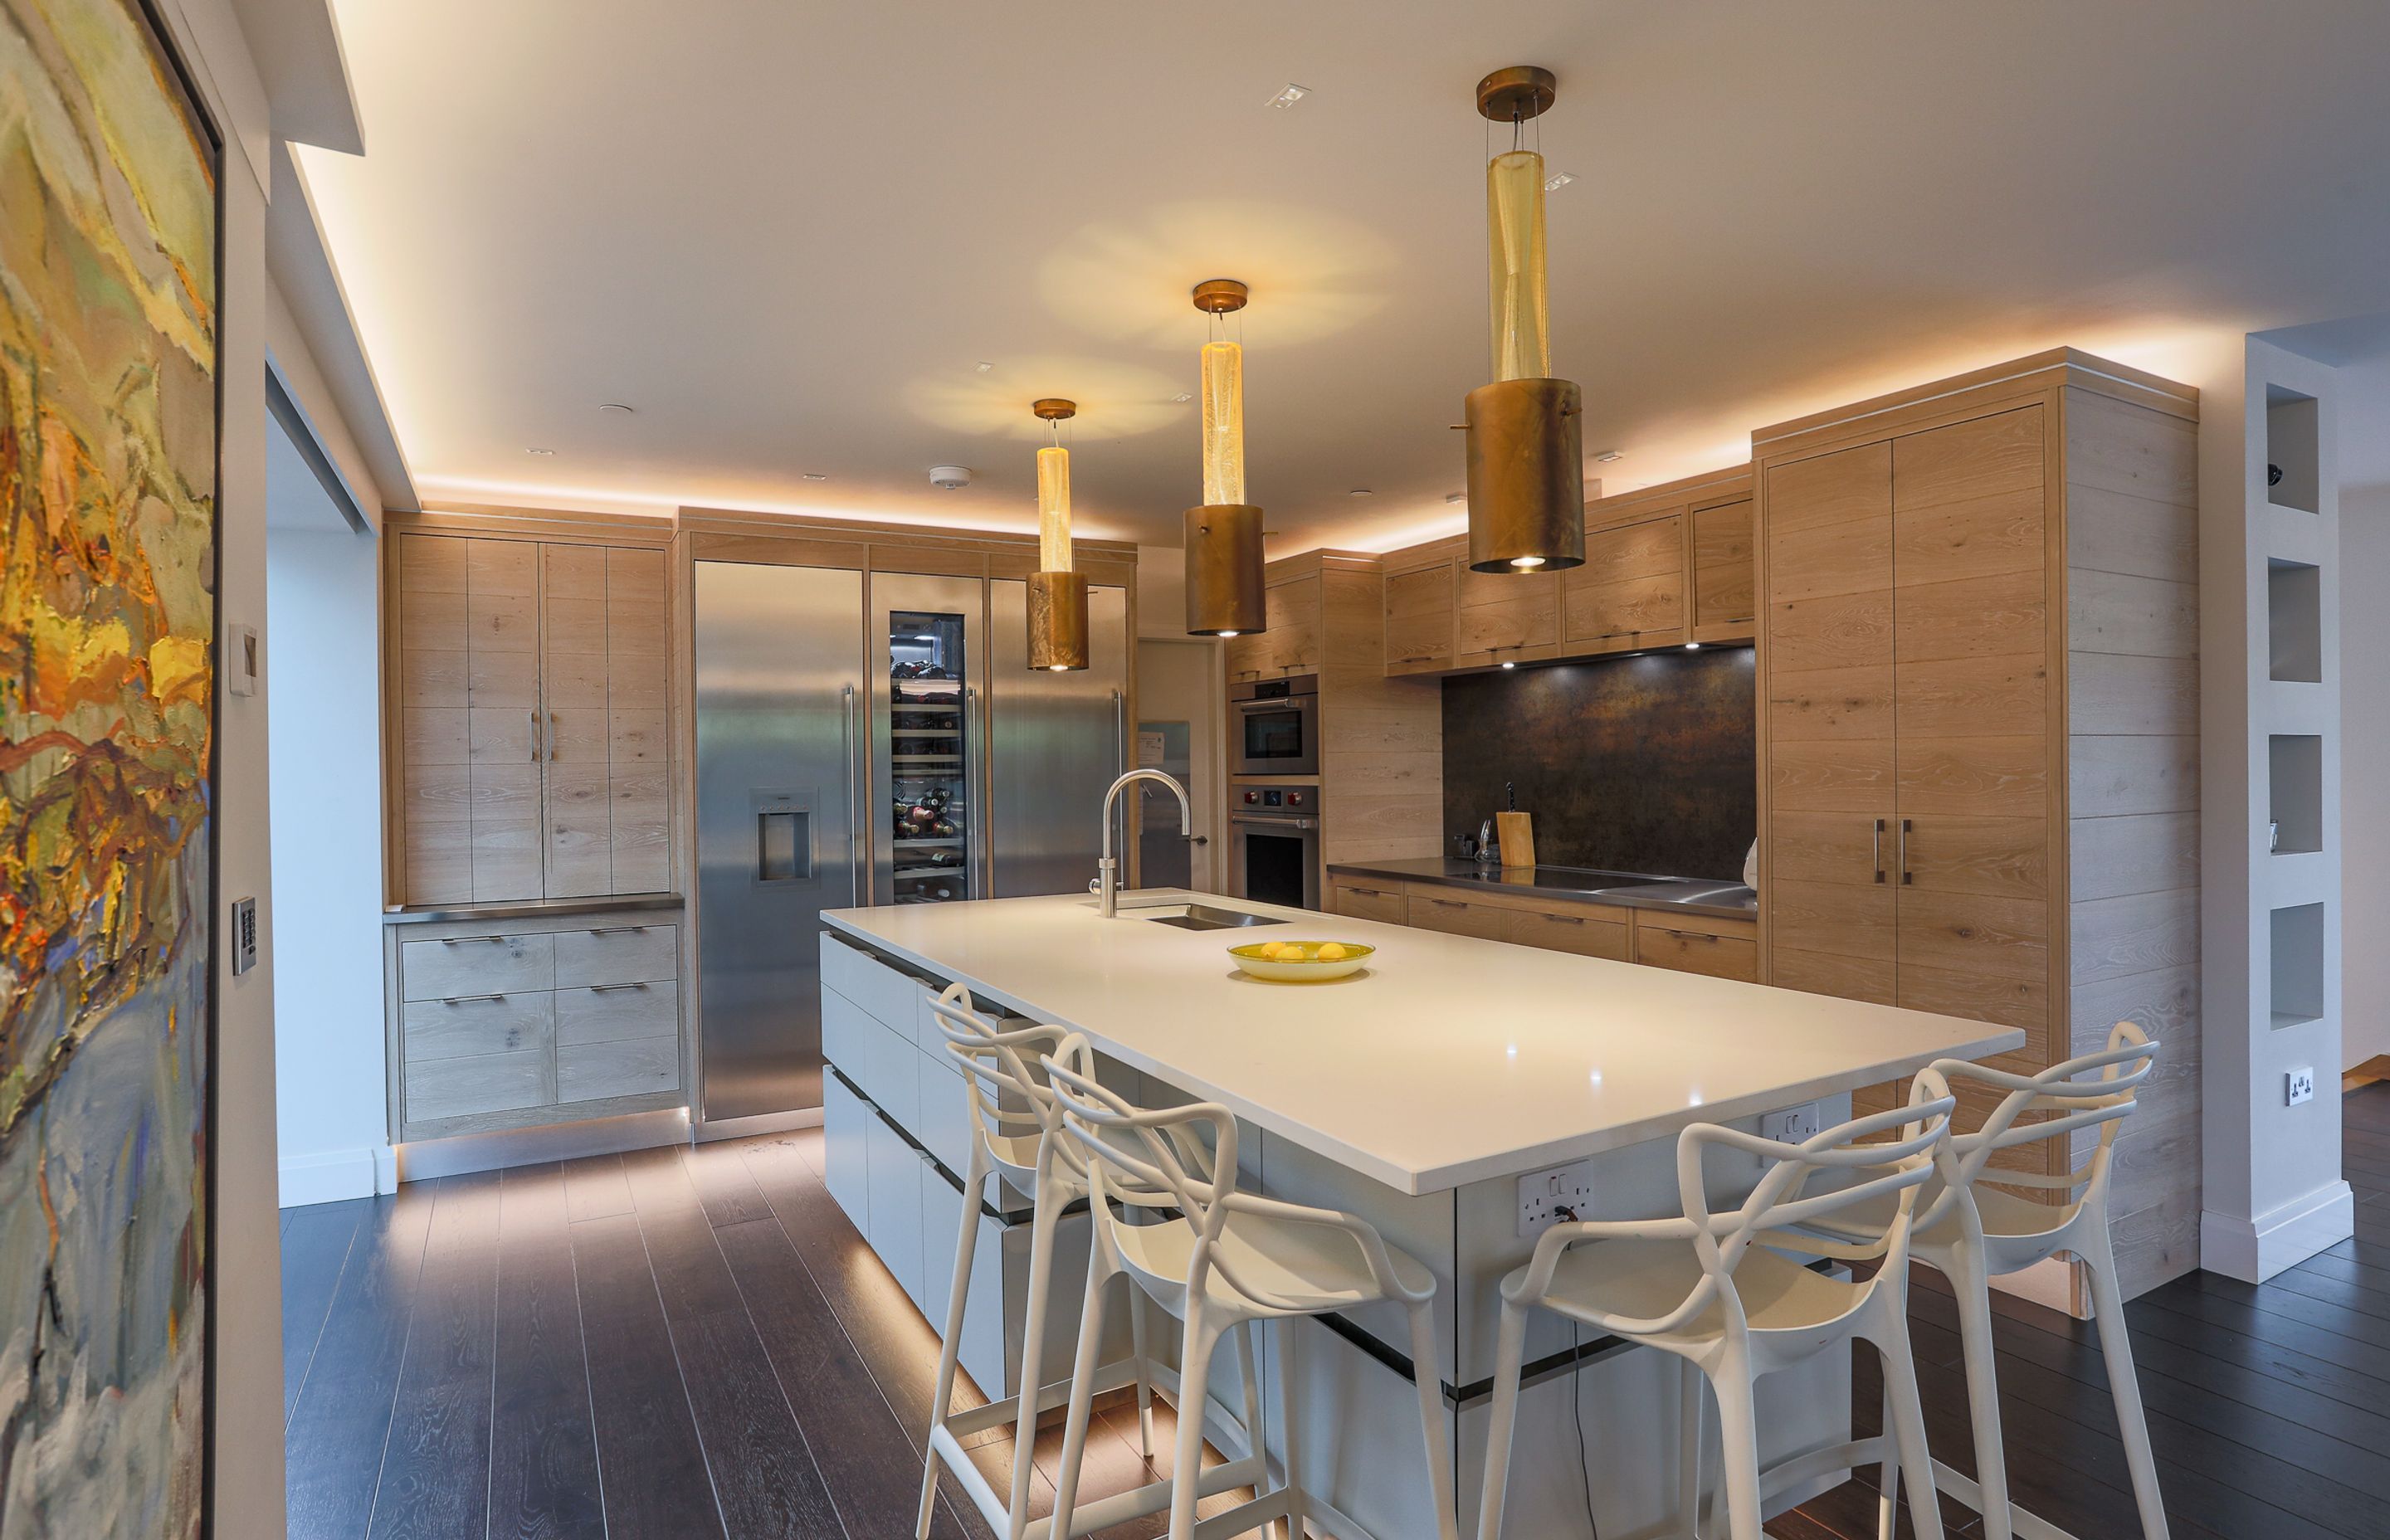 This kitchen was designed and built in the UK with Designworx specifying the finishes, lighting, flooring and furniture.